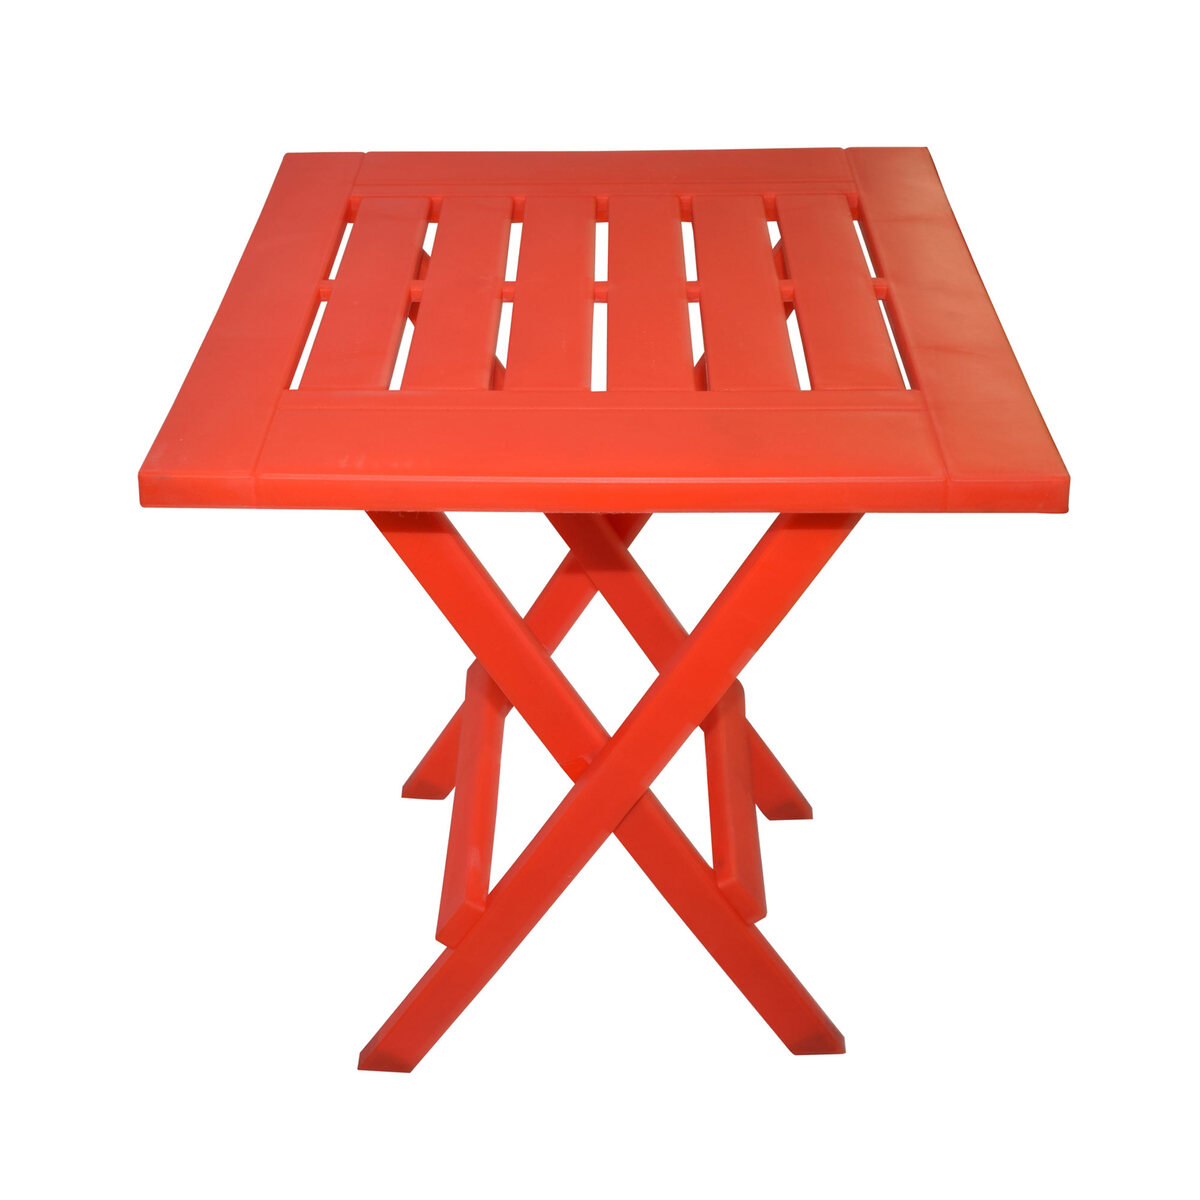 Home Needs Plastic Foldable Table 54404, Assorted colors, per pc